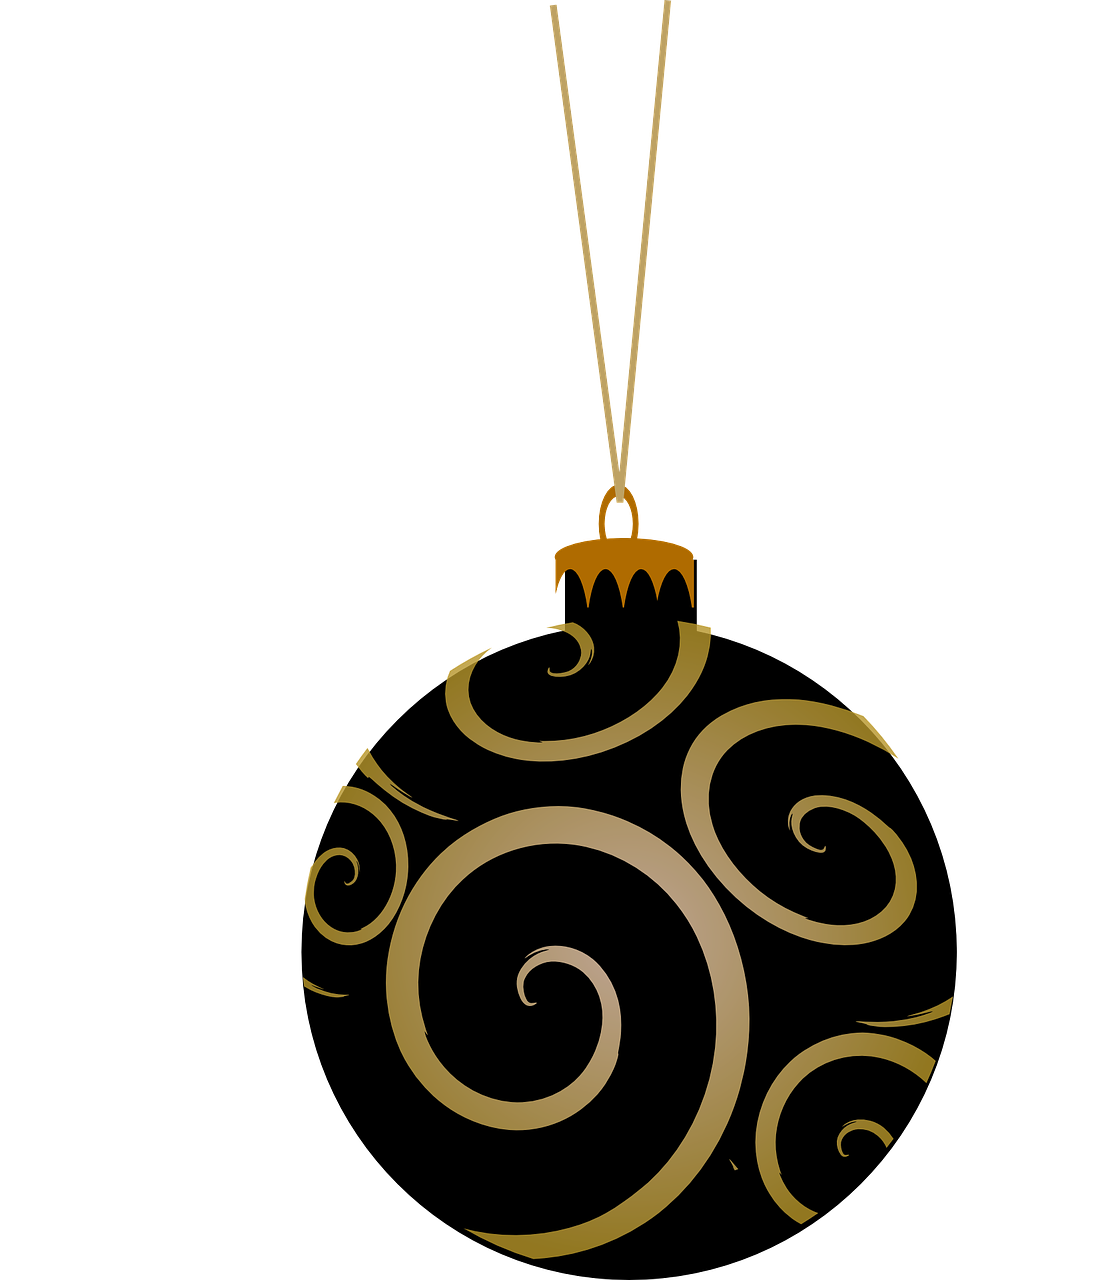 A Black And Gold Ornament With White Snowflakes